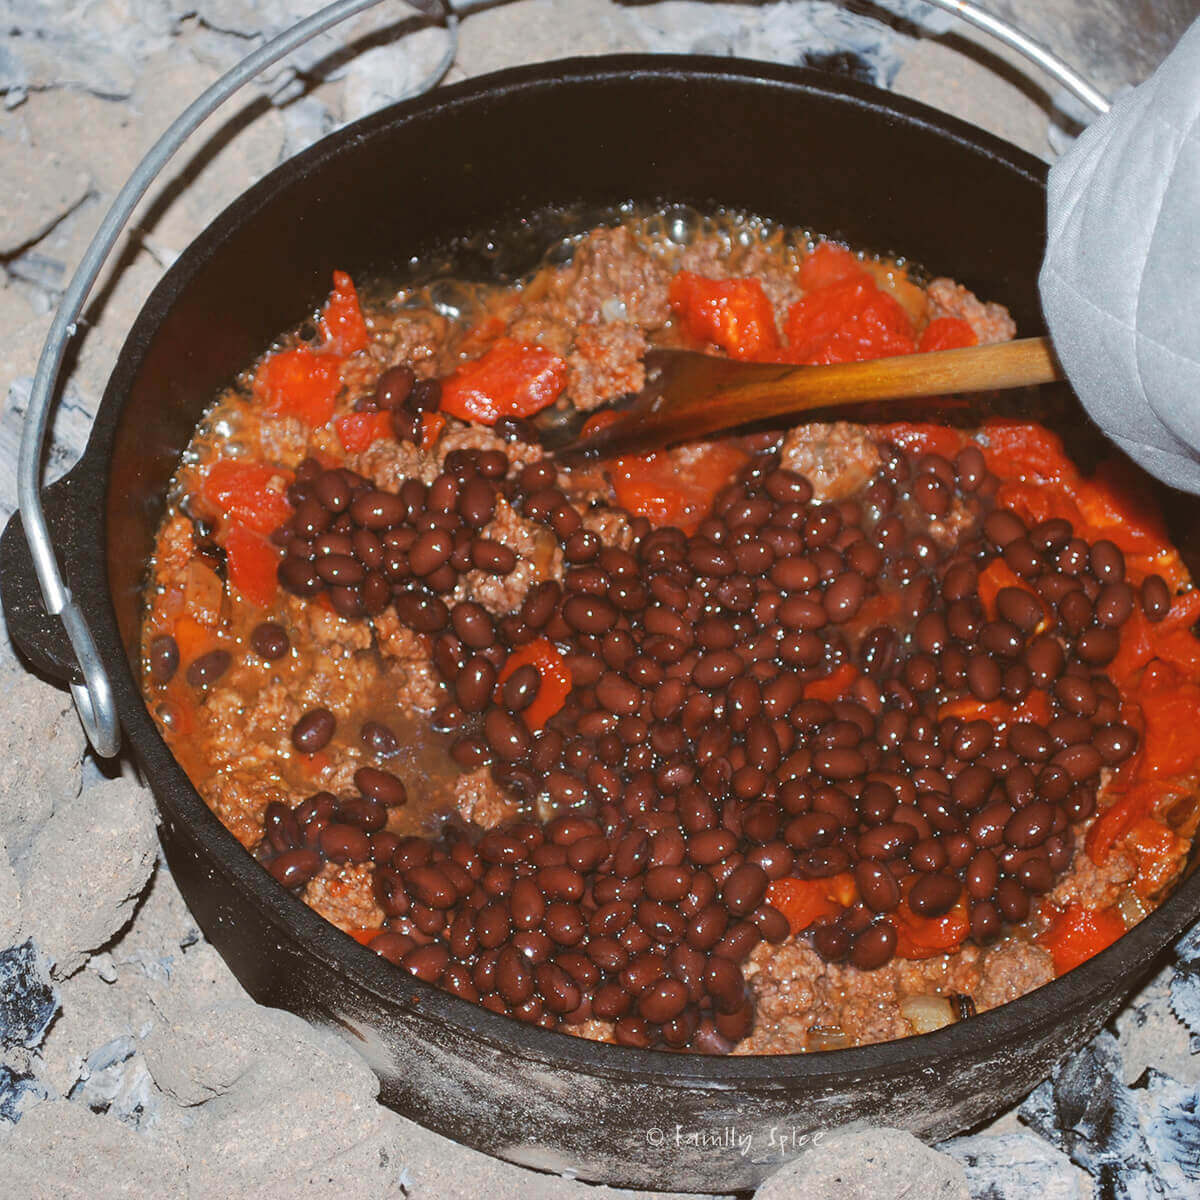 Adding black beans to chili mixture in cast iron dutch oven